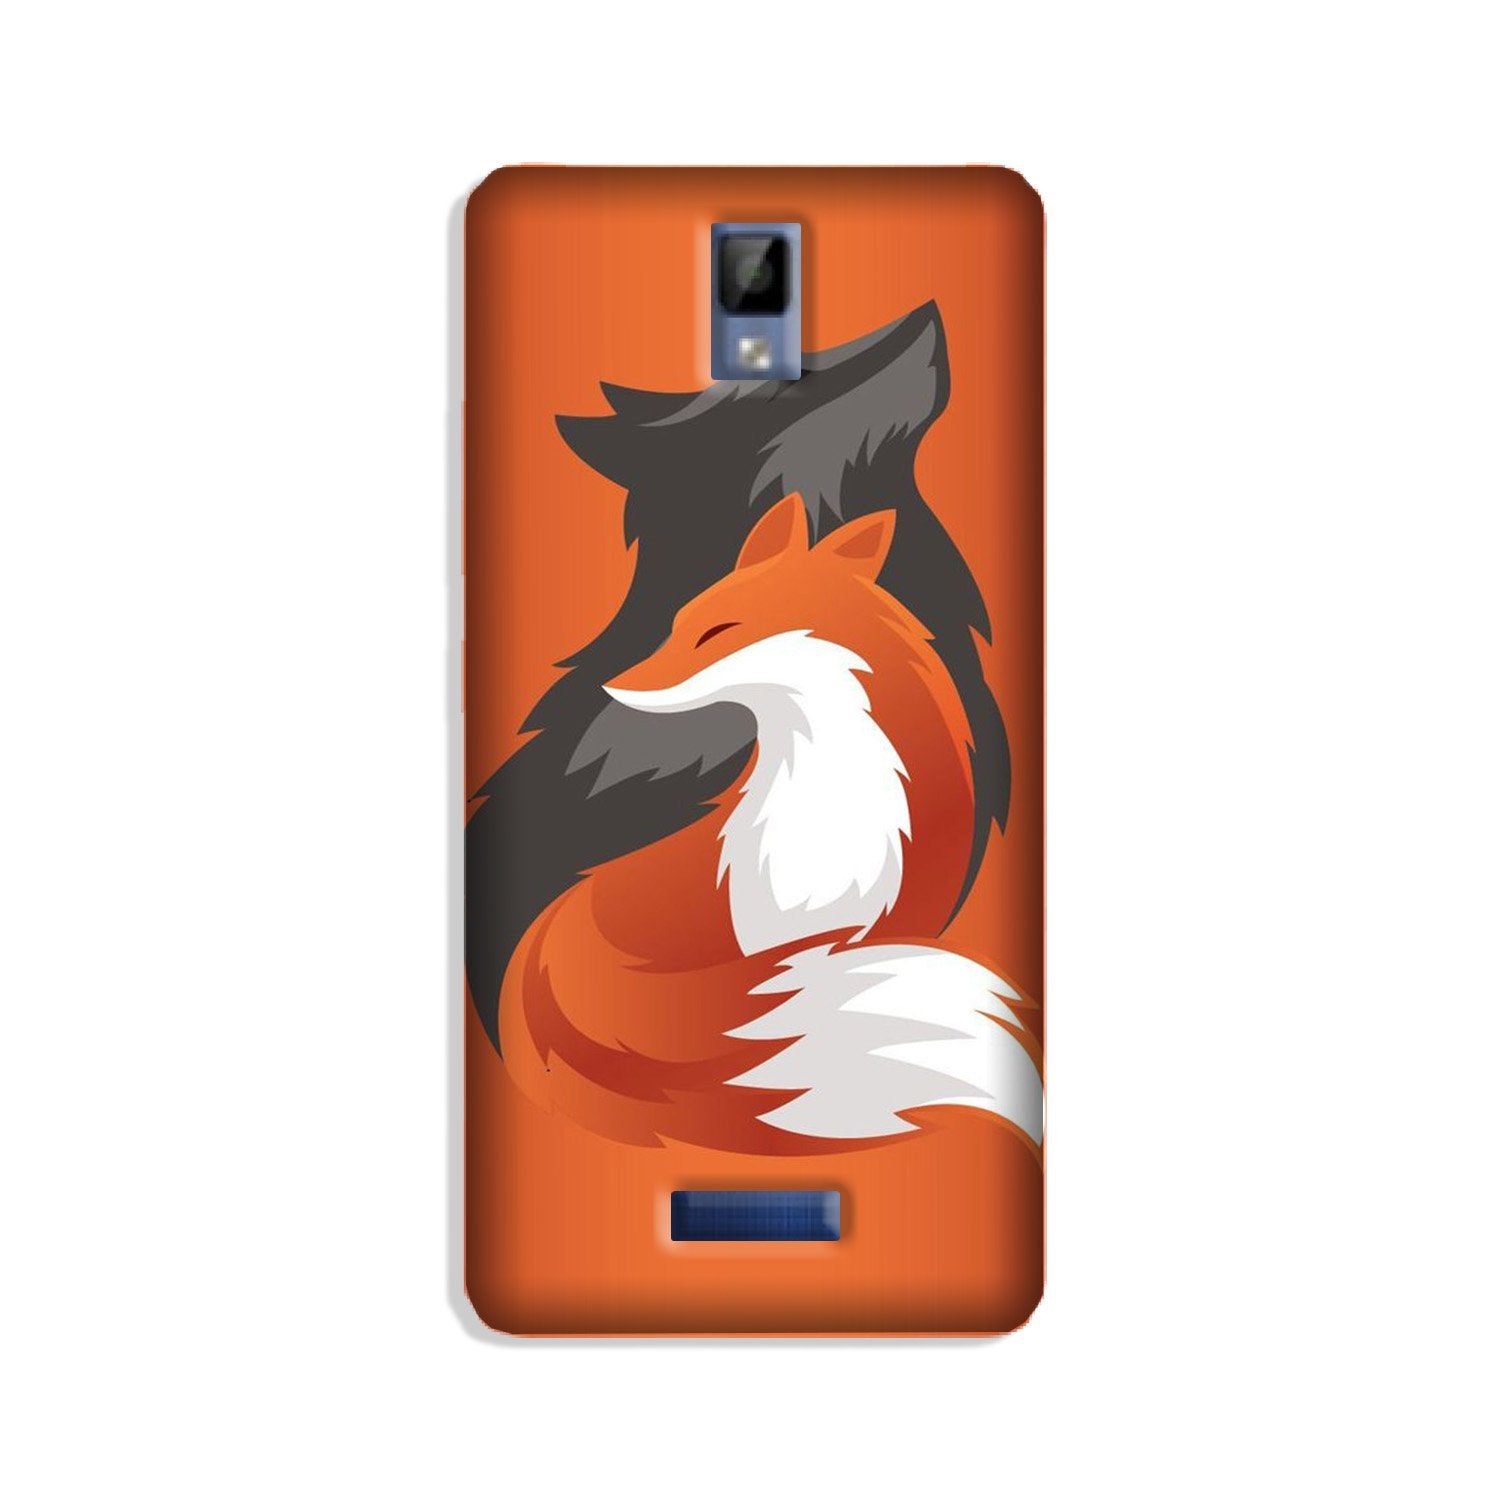 Wolf  Case for Gionee P7 (Design No. 224)